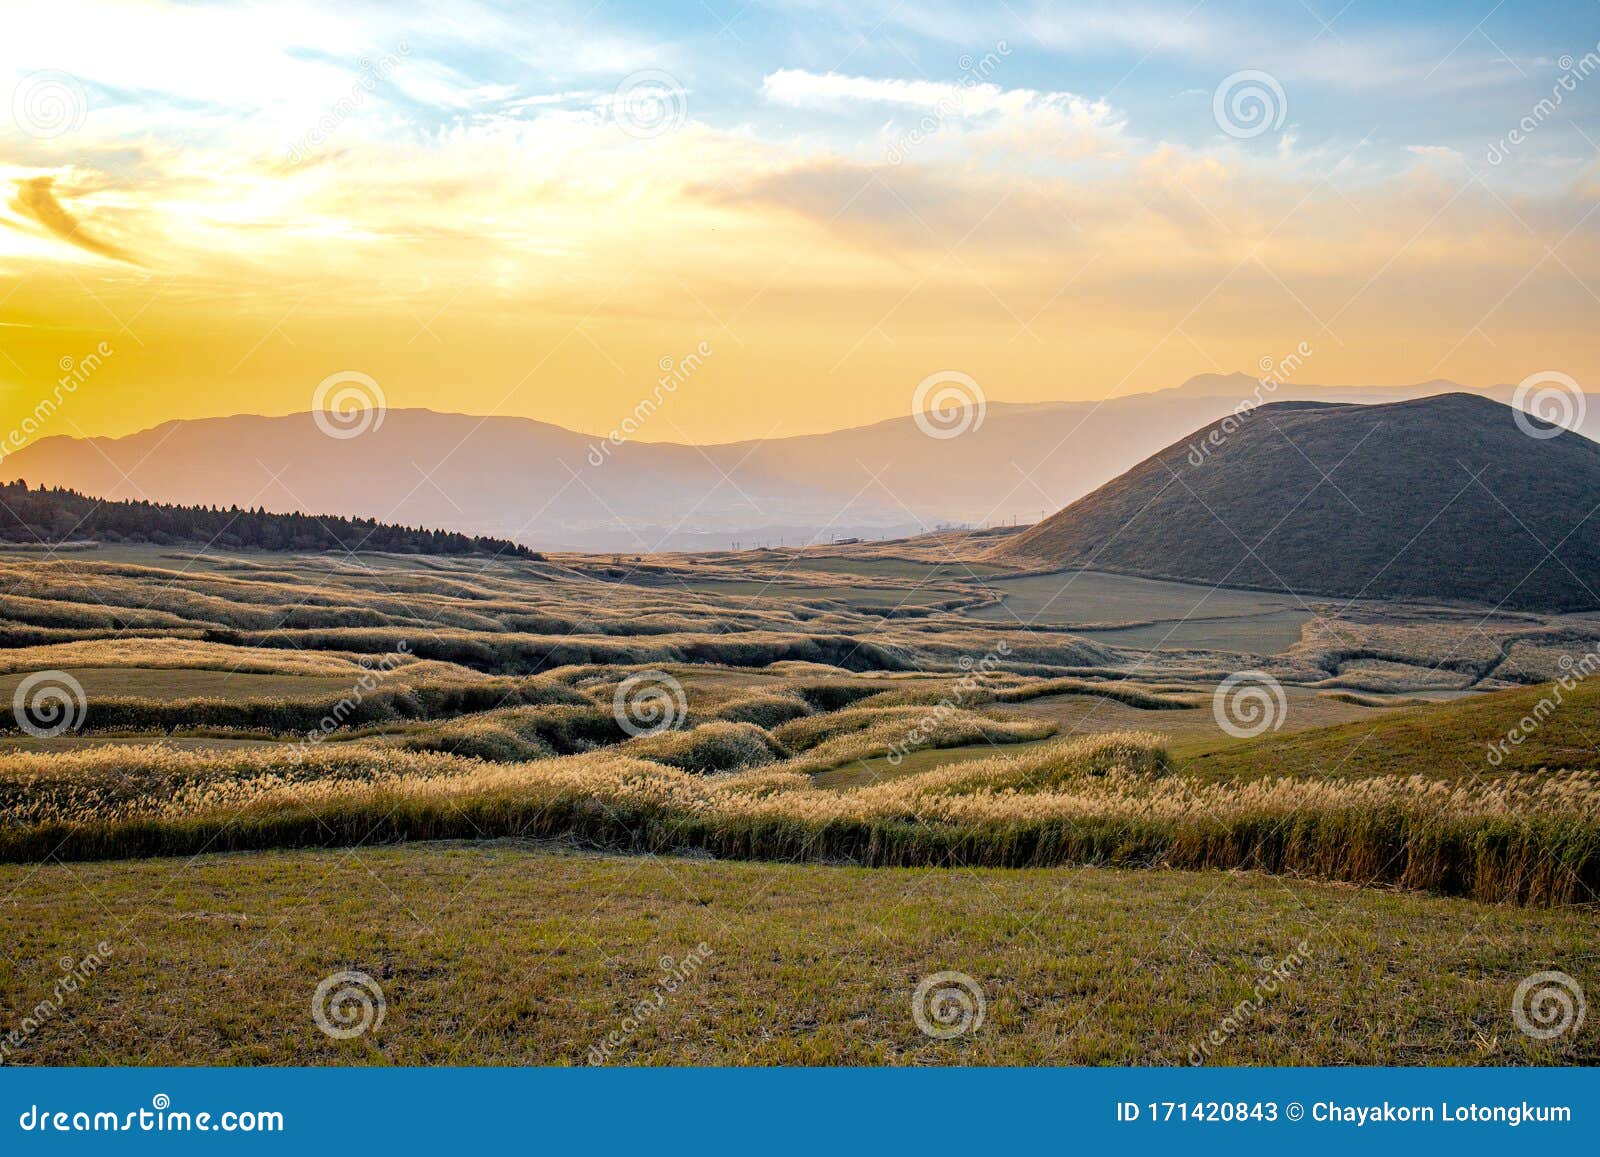 Komezuka Of Mount Aso Aso San The Largest Active Volcano In Japan Stock Image Image Of Grass Kyushu